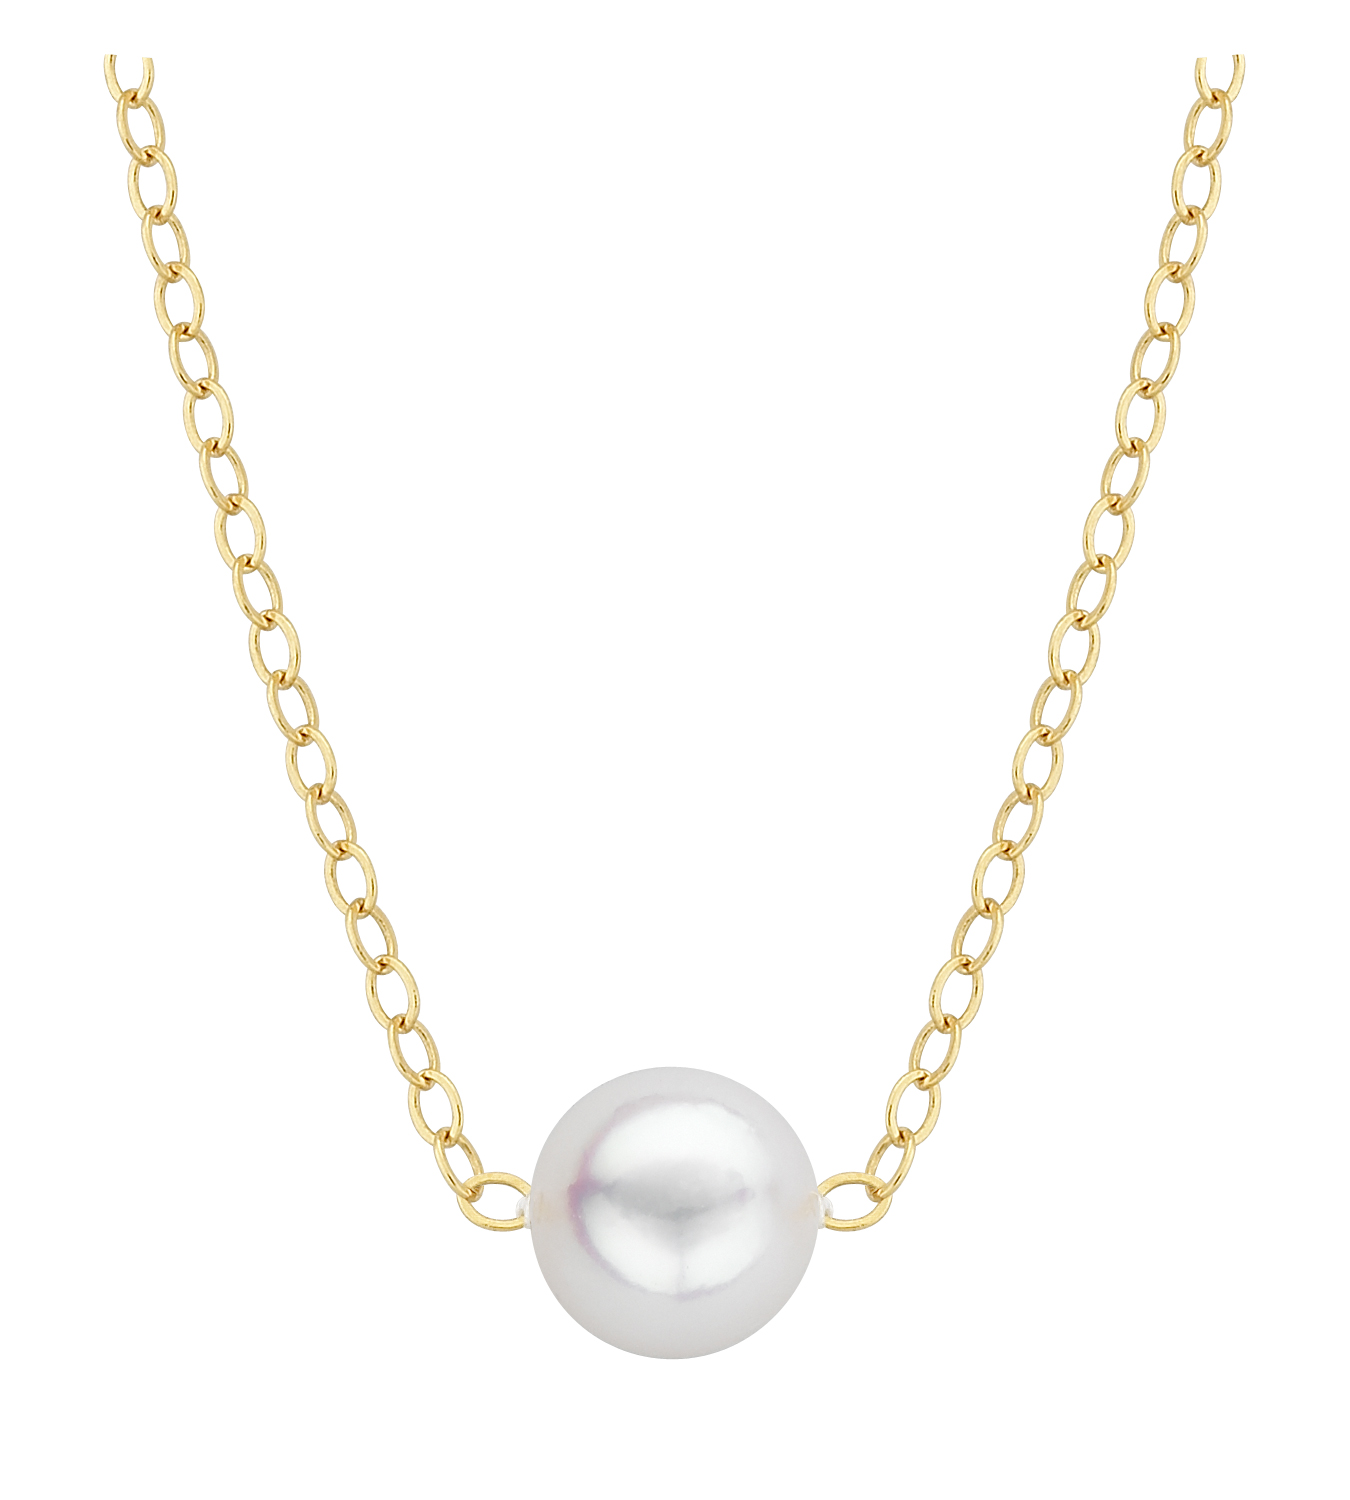 Add-A-Pearl necklace